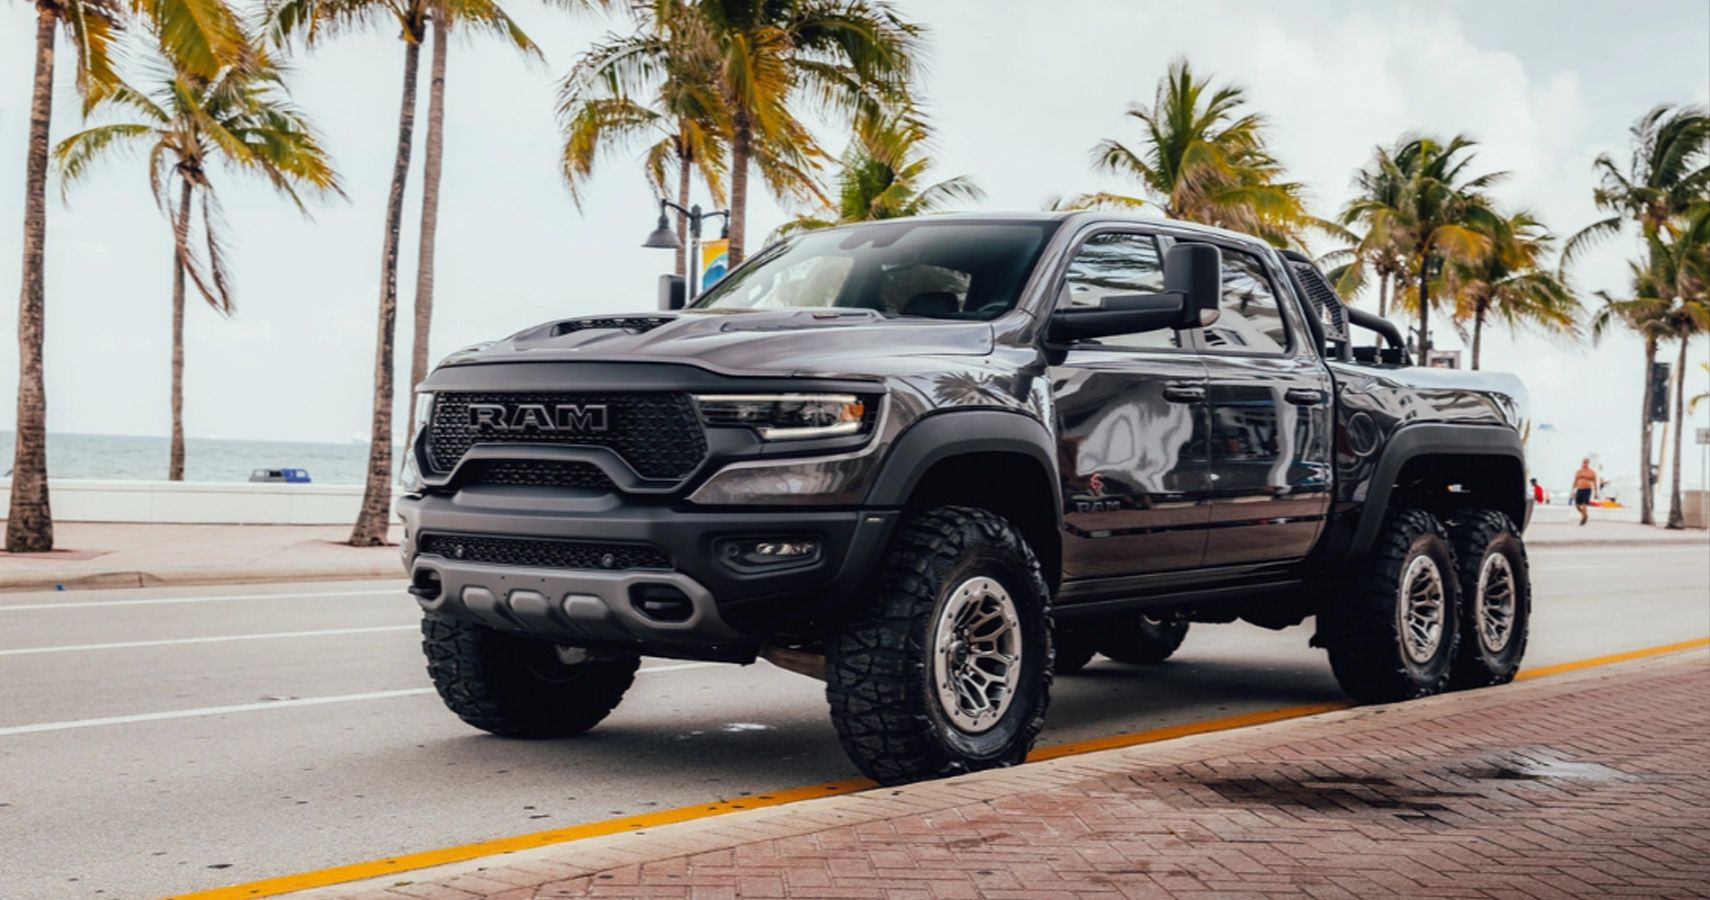 Check Out Every Upgrade This Florida Company Gives The 'Warlord' Ram TRX